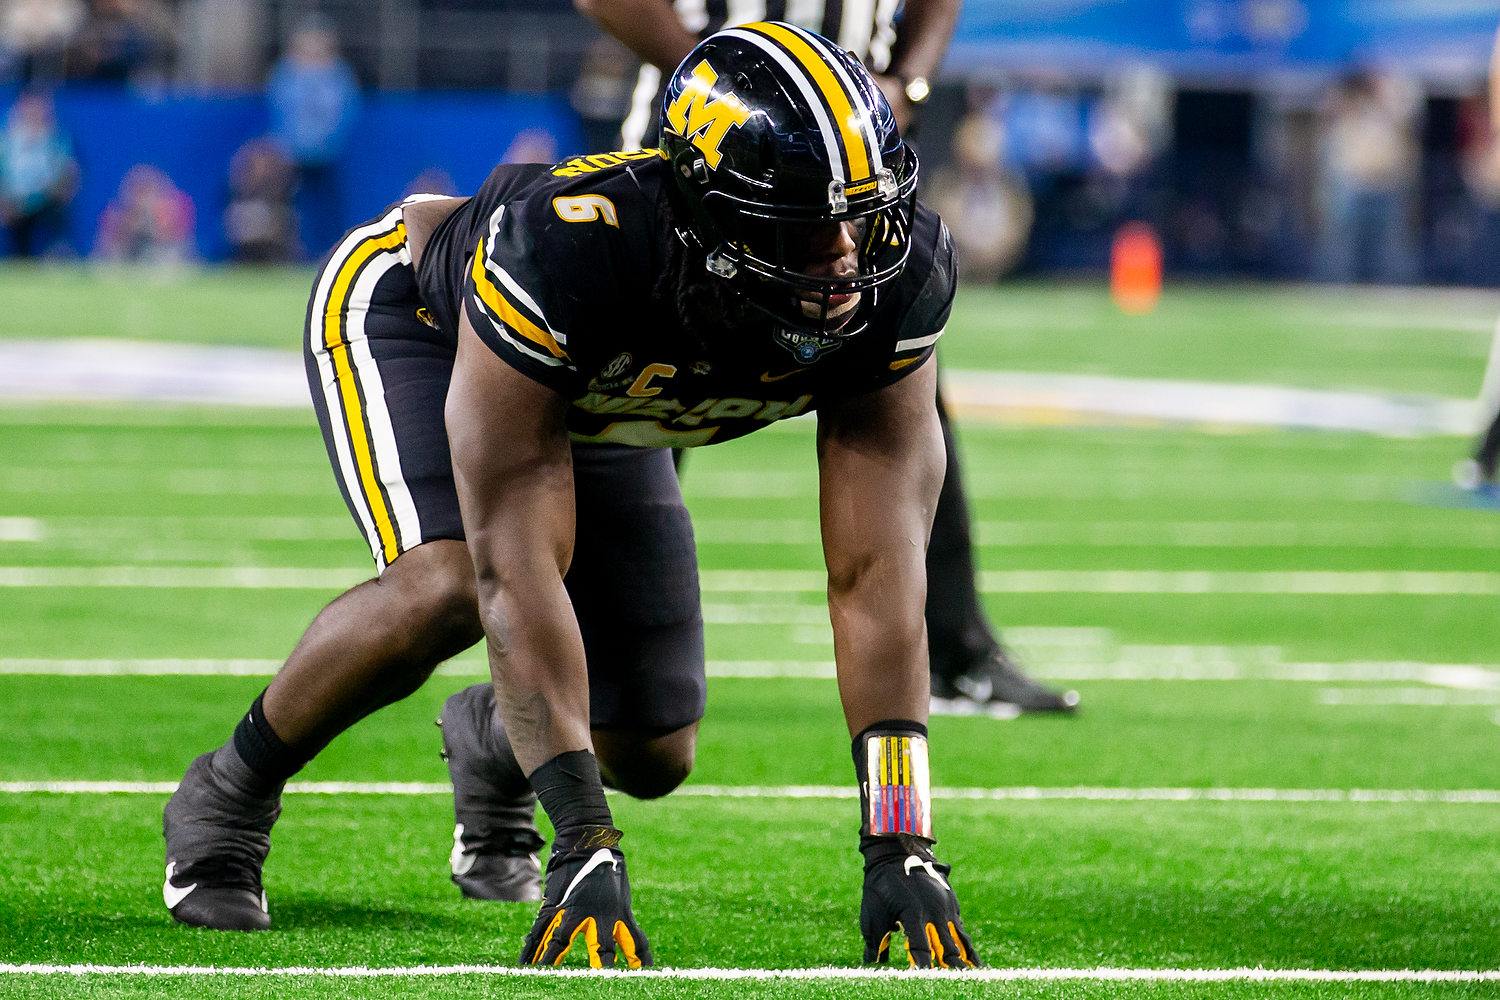 Football player in uniform crouched on field in ready stance